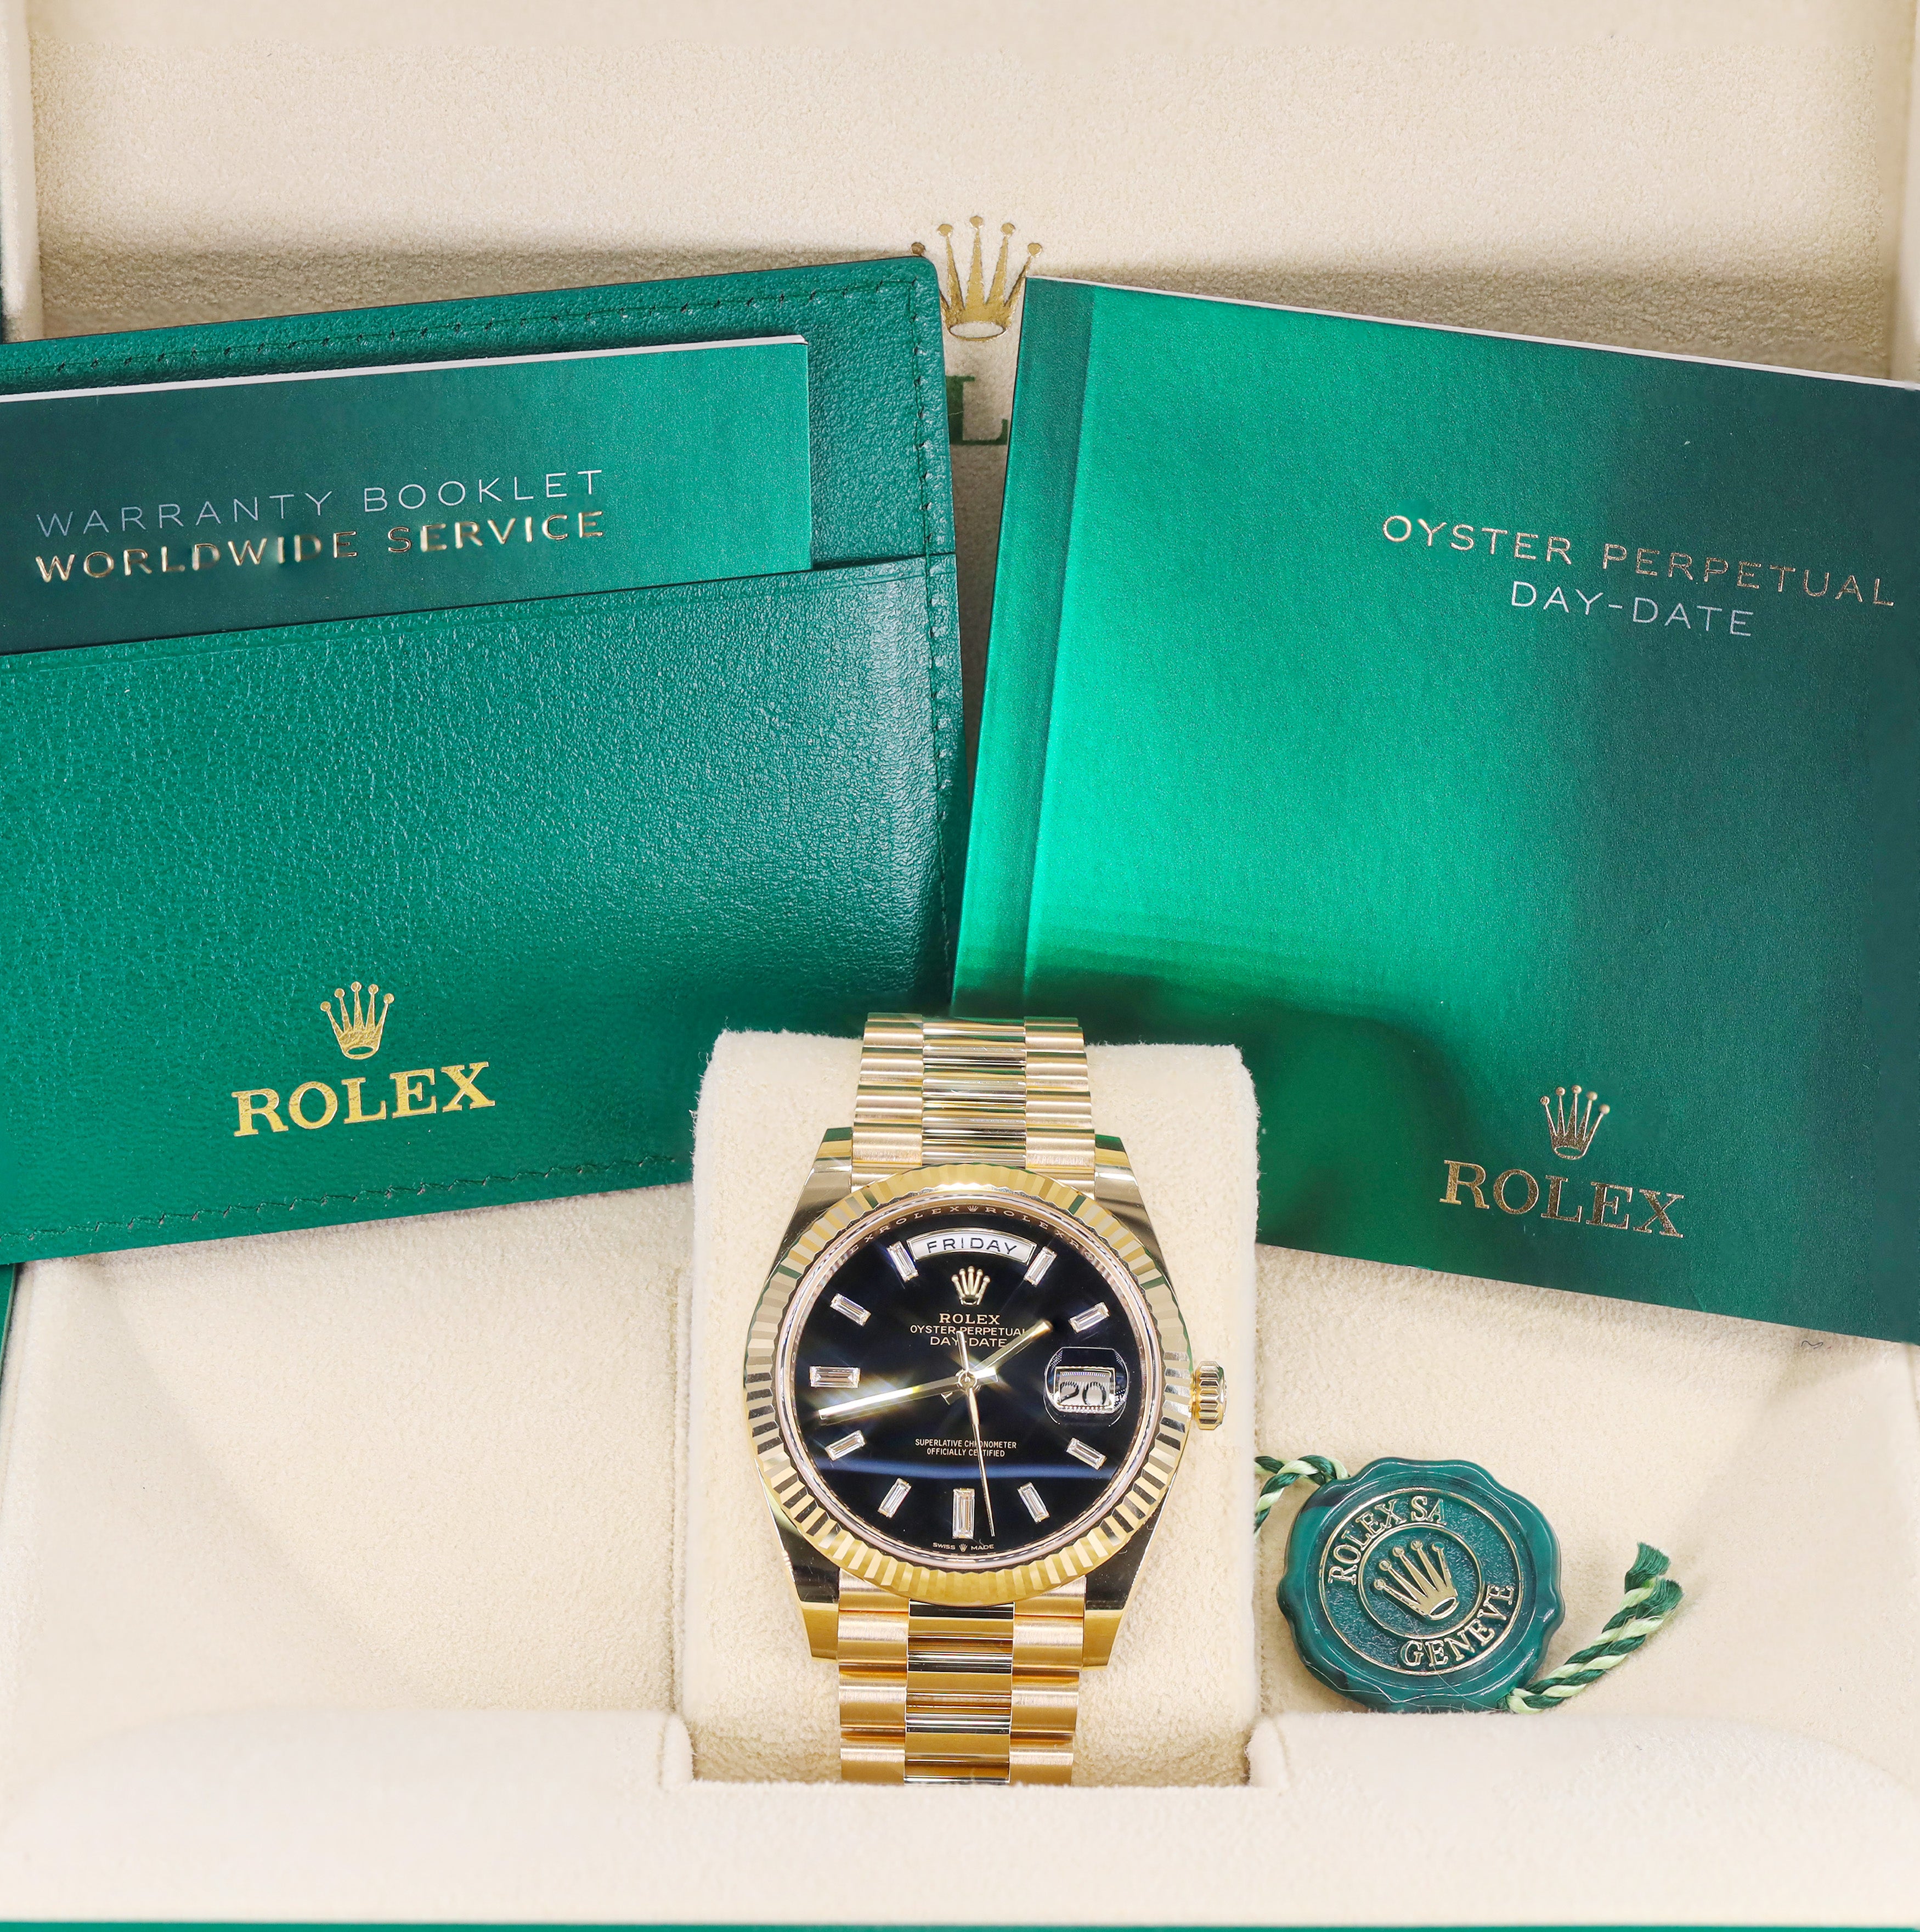 Rolex 228238 Day-Date 40mm Black Onyx Baguette Diamond Dial Yellow Gold